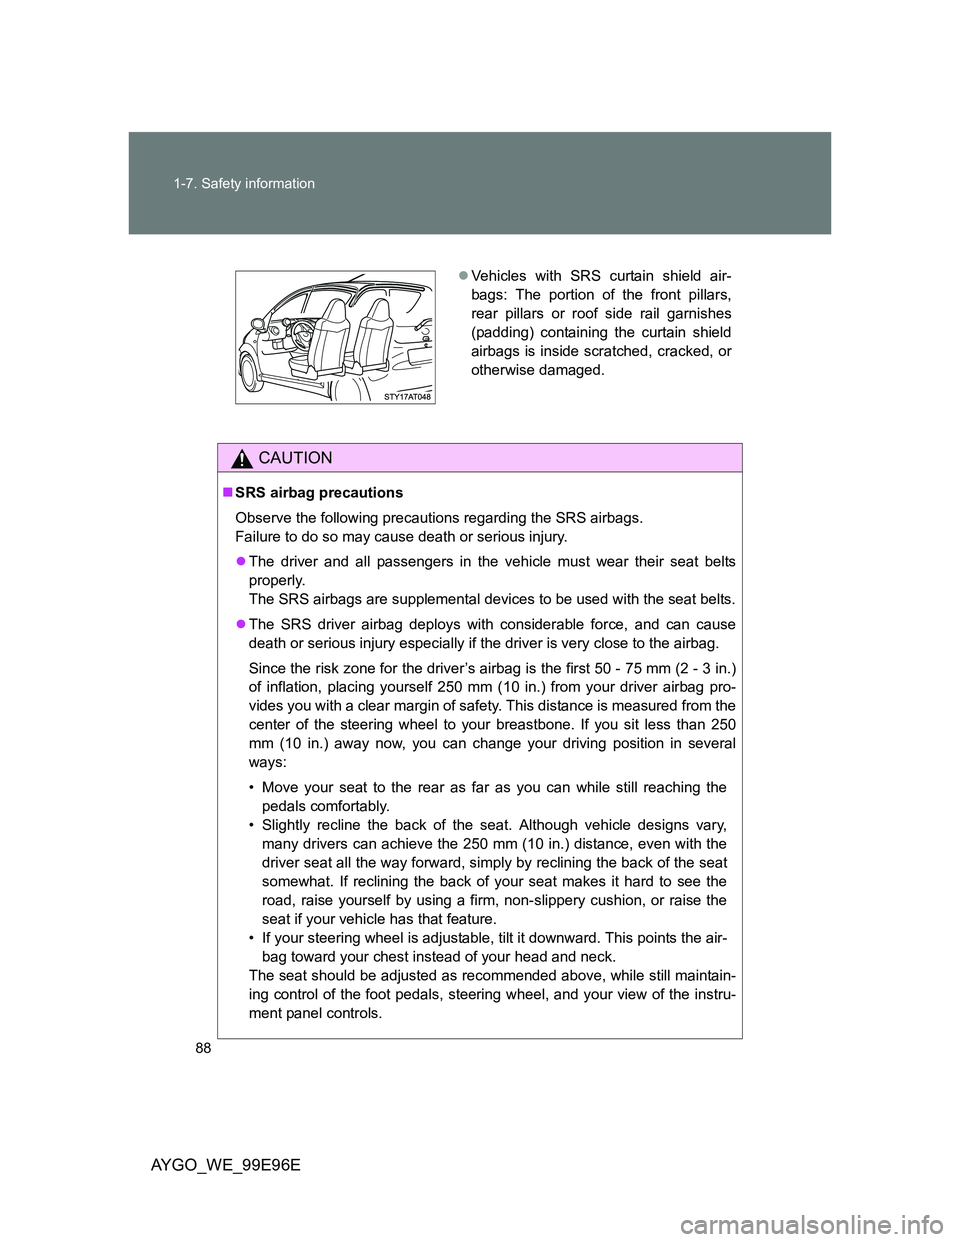 TOYOTA AYGO 2012  Owners Manual (in English) 88 1-7. Safety information
AYGO_WE_99E96E
CAUTION
SRS airbag precautions
Observe the following precautions regarding the SRS airbags. 
Failure to do so may cause death or serious injury.
The dri